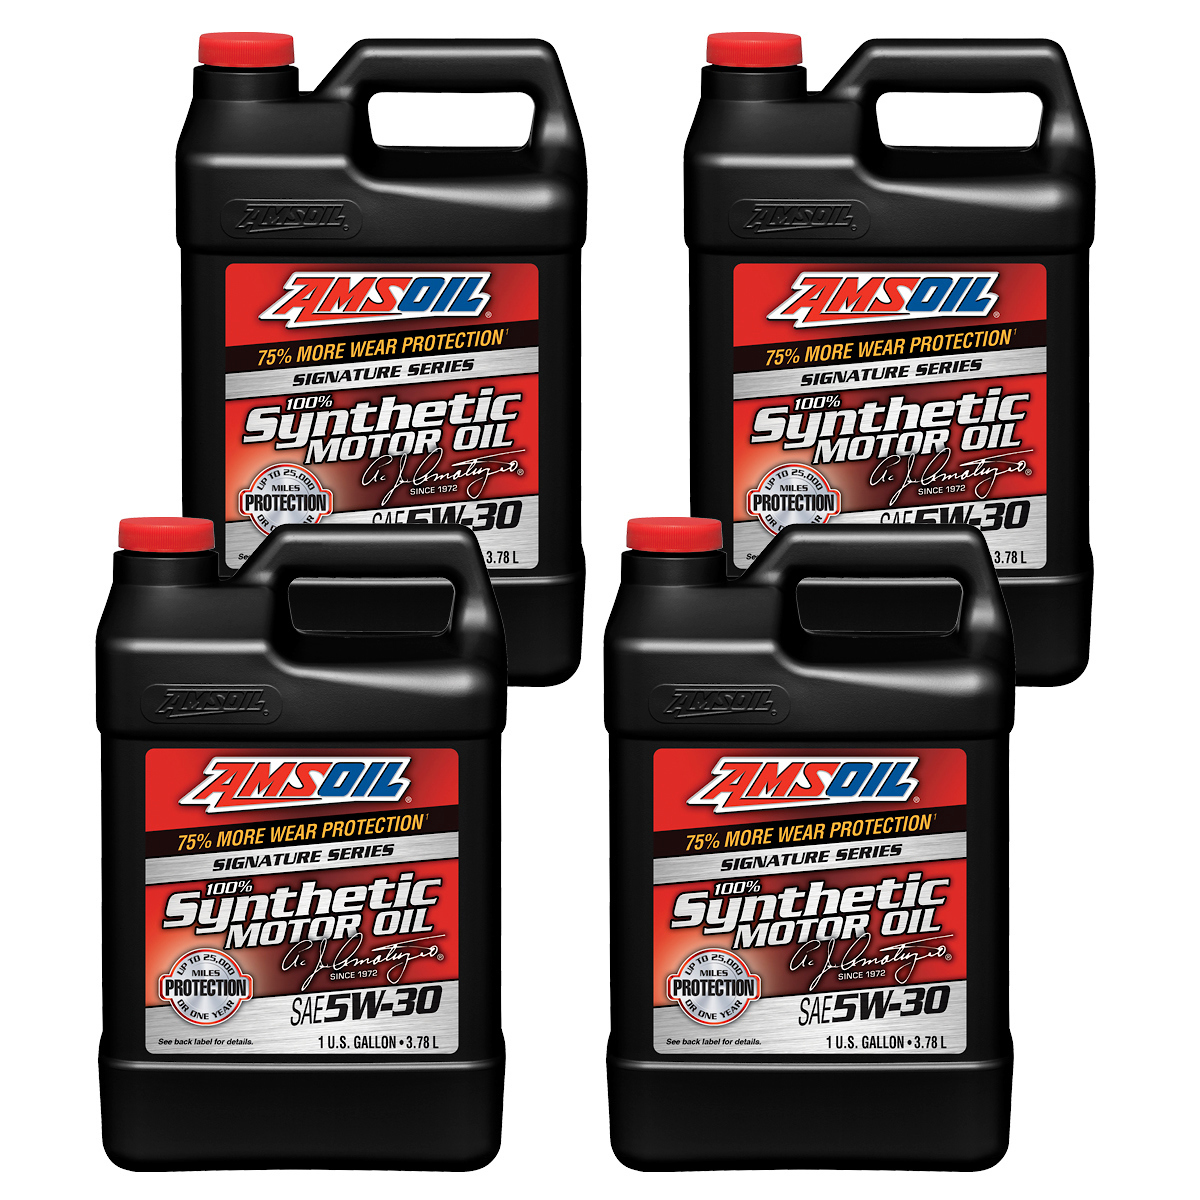 5W-30 synthetic motor oil Gallon jug Case of two